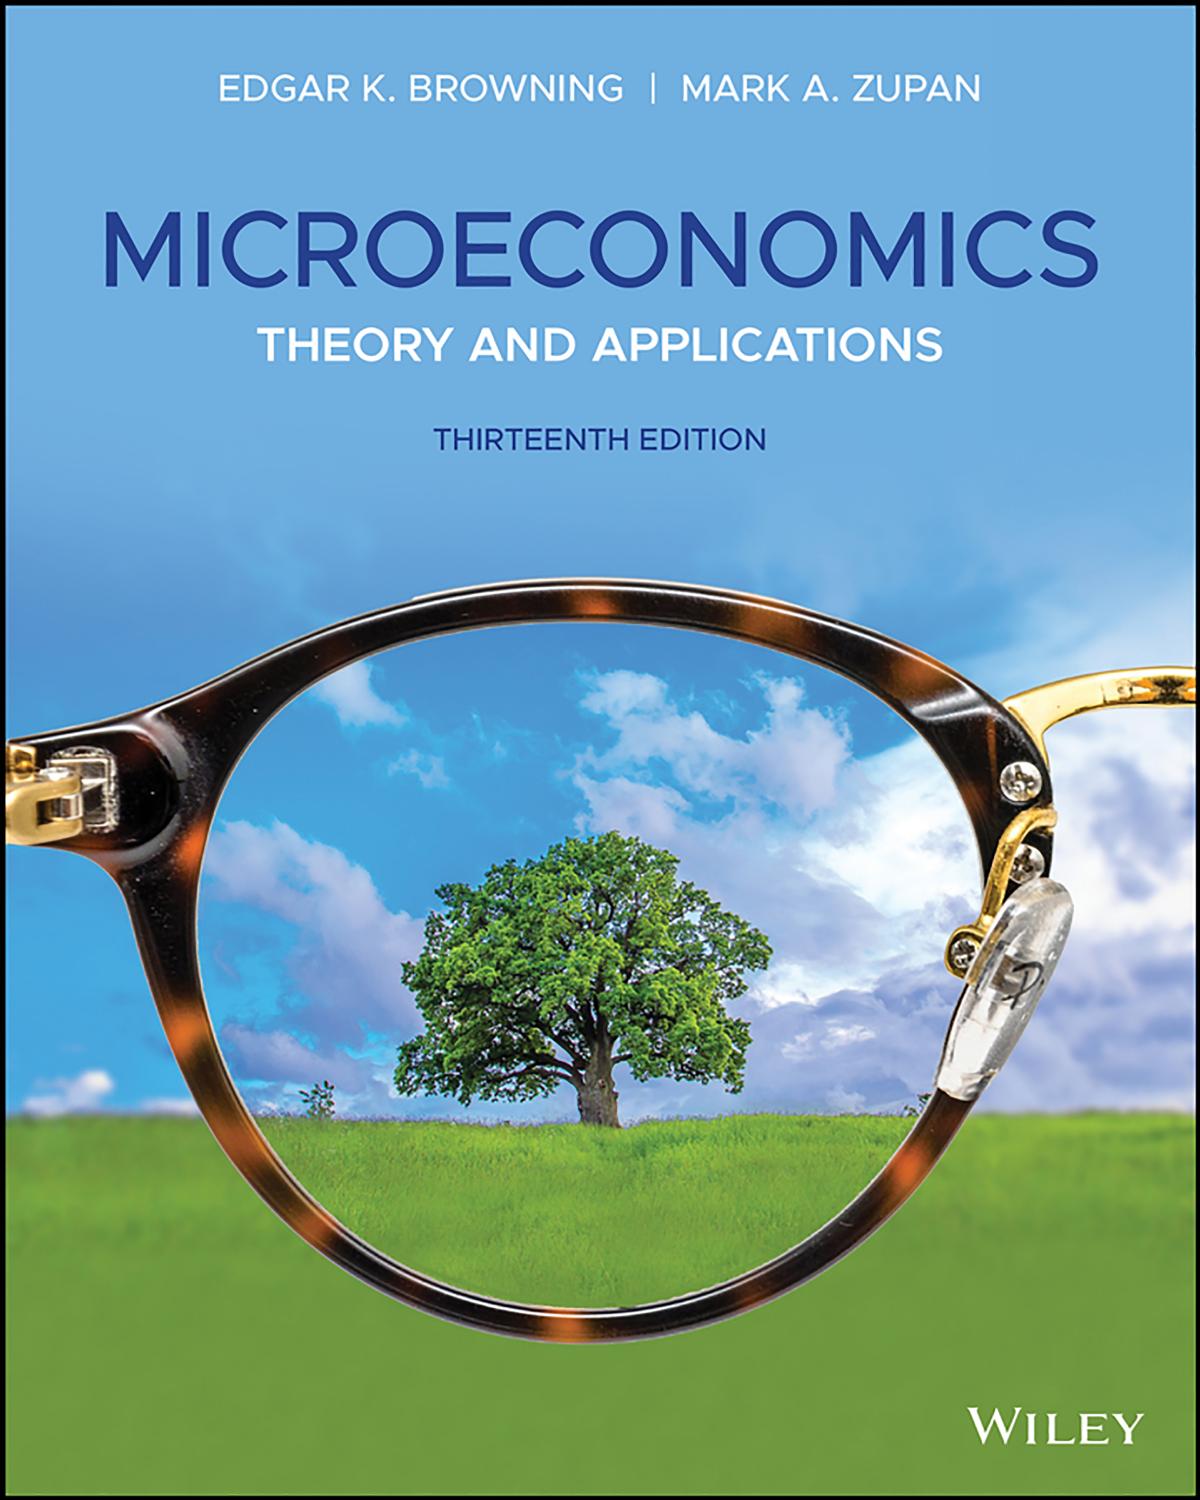 (eBook PDF)Microeconomics: Theory and Applications 13th Edition by Edgar K. Browning,Mark A. Zupan